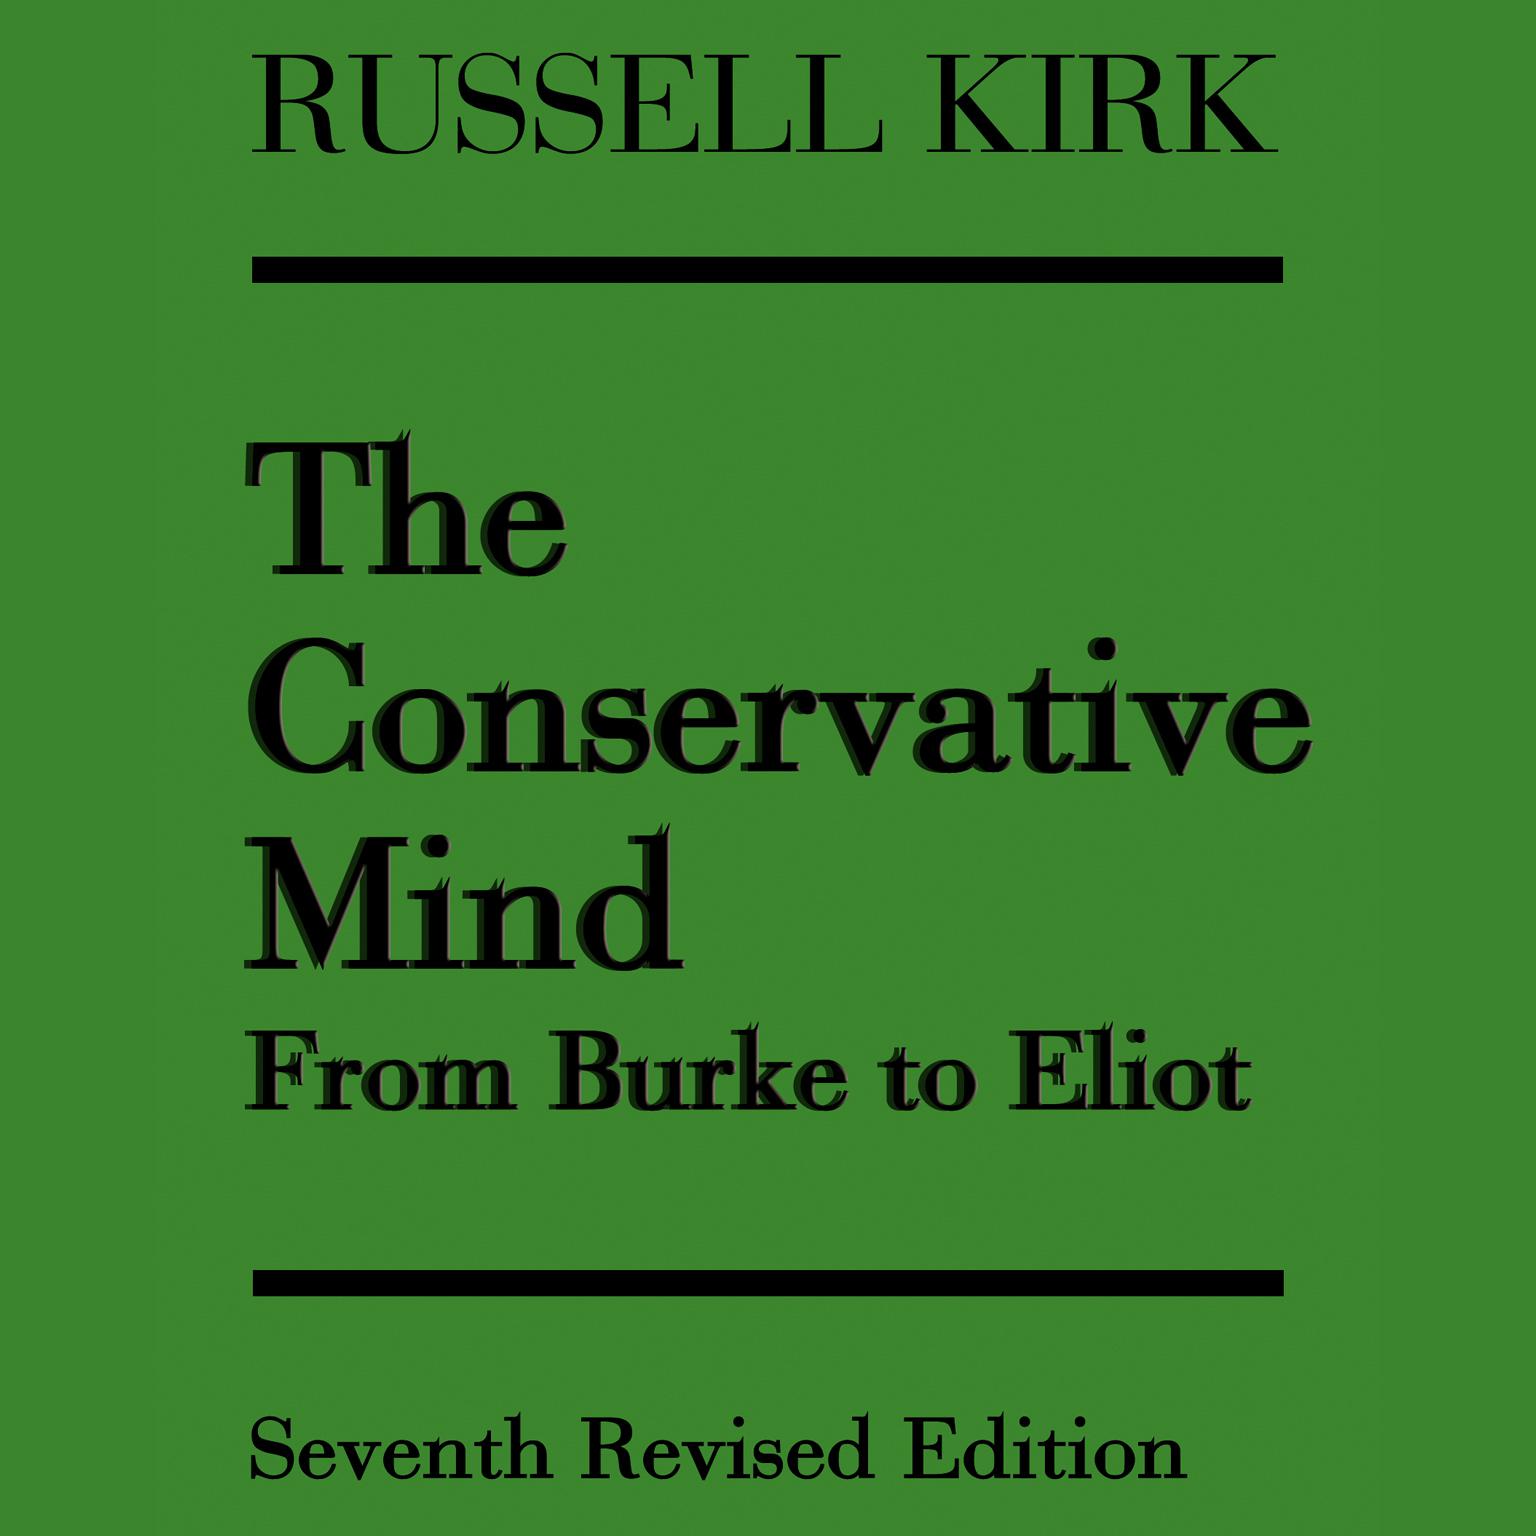 The Conservative Mind: From Burke to Eliot Audiobook, by Russell Kirk